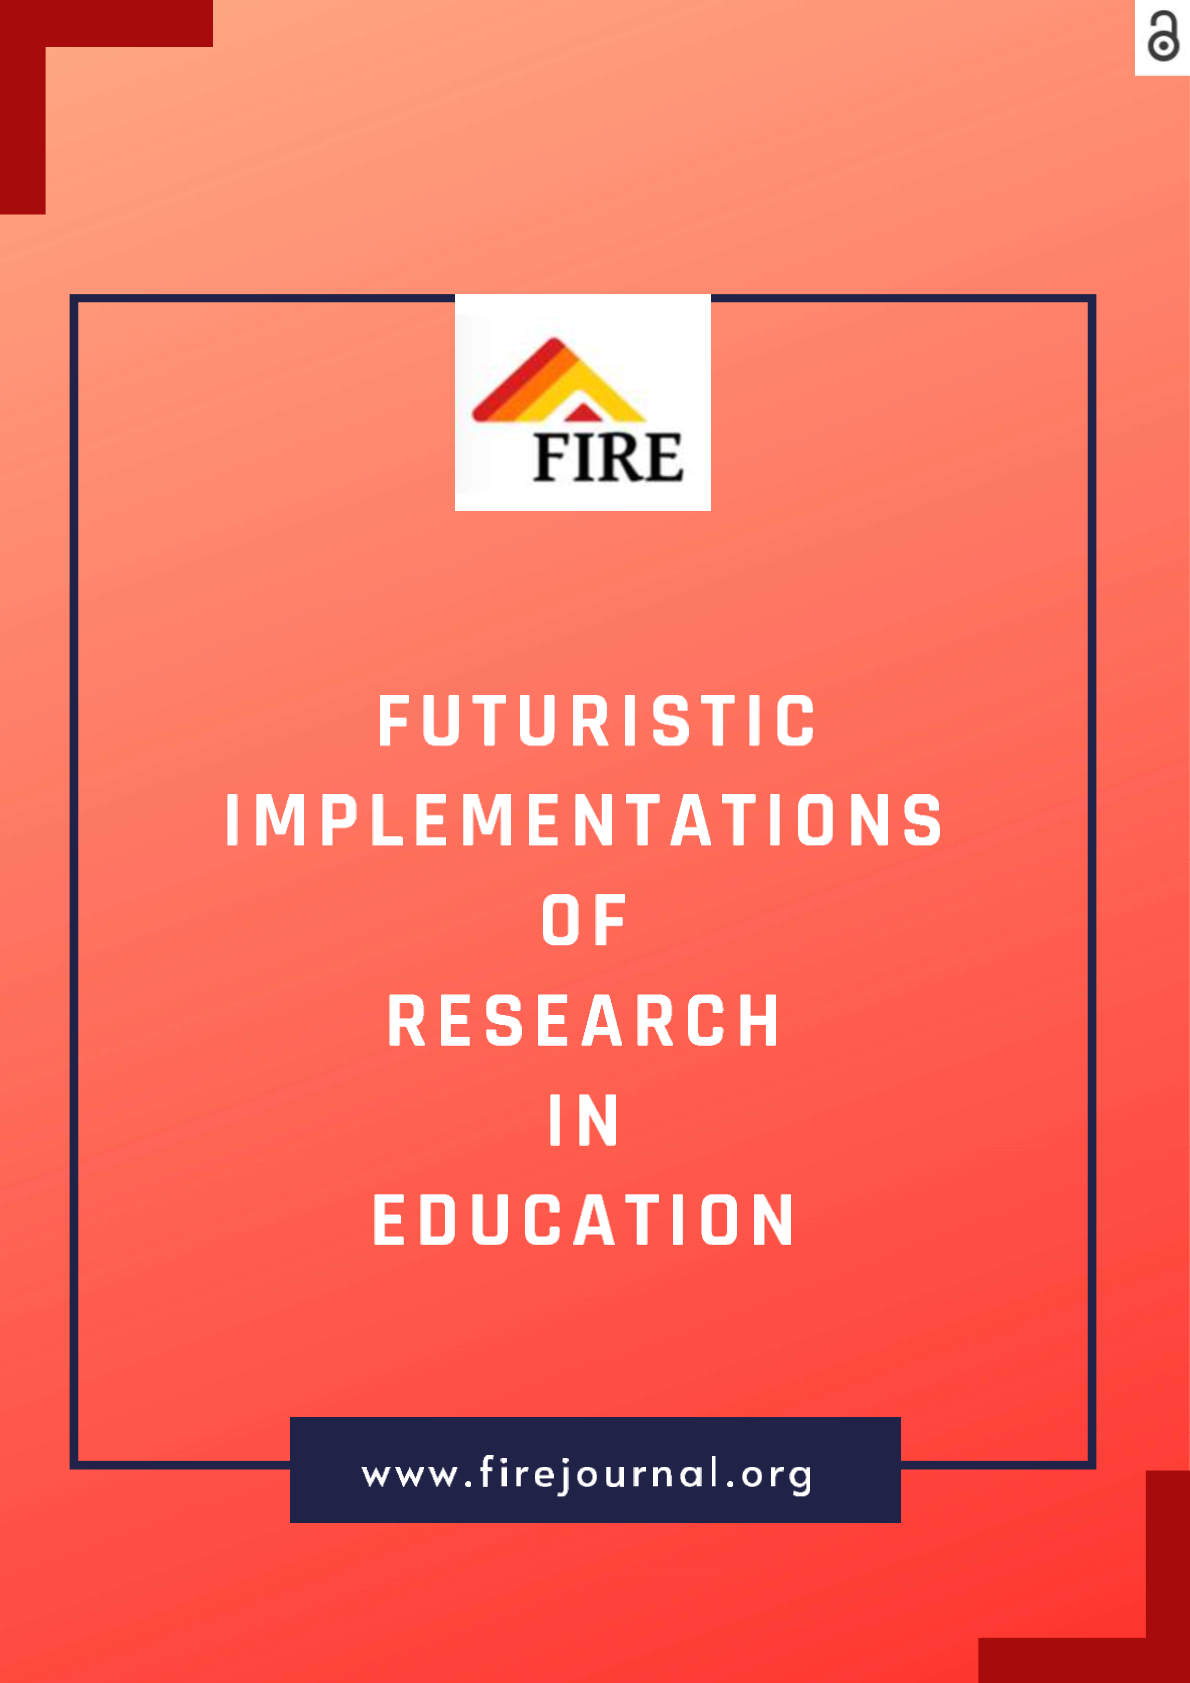 FIRE: Futuristic Implementations of Research in Education-Asos İndeks